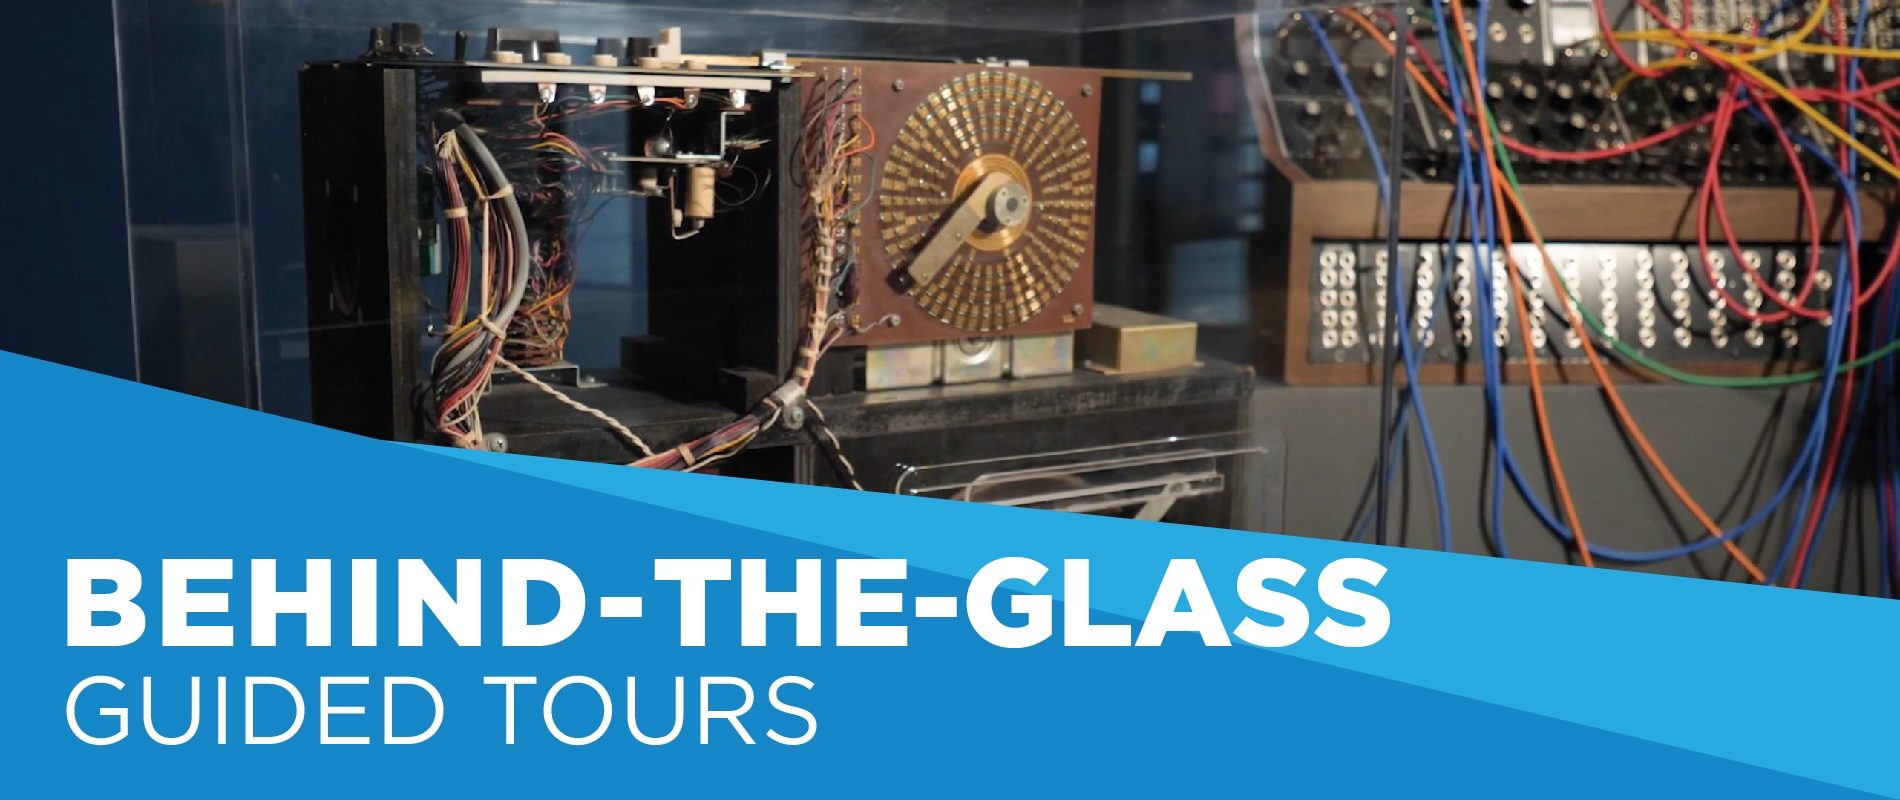 Behind-the-Glass Tours